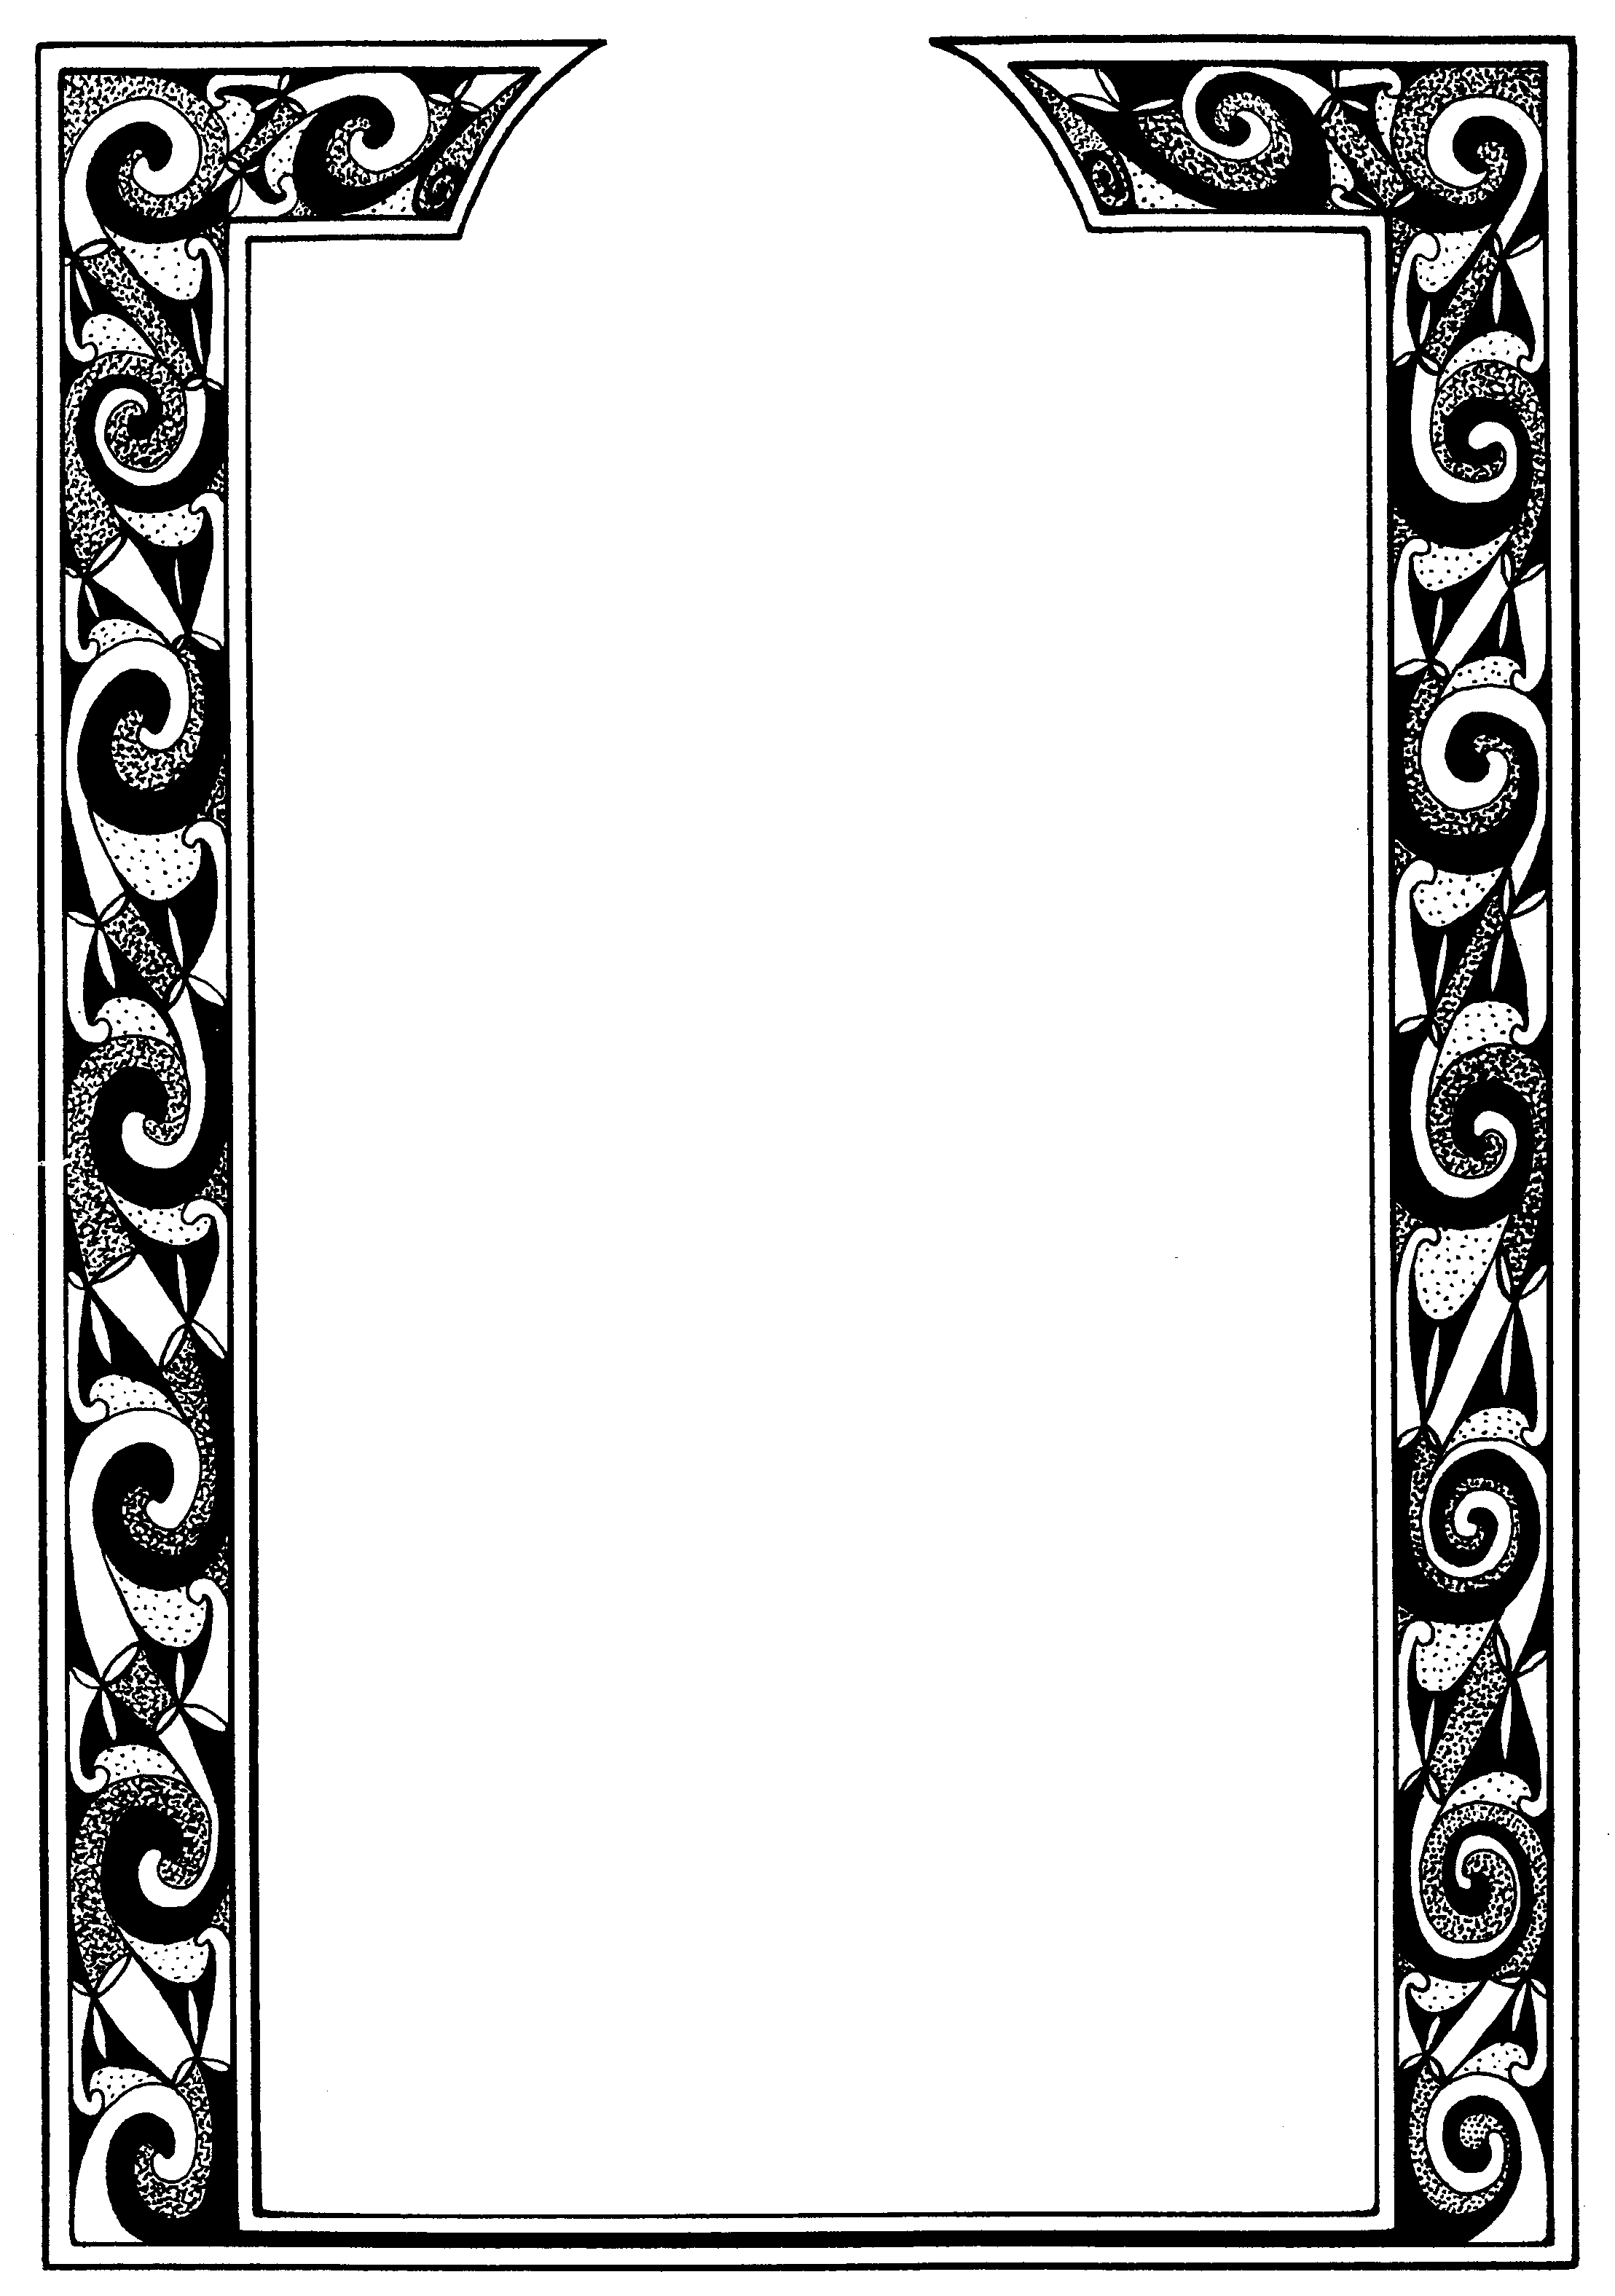 19 Black And White Page Border Free Cliparts That You Can Download To